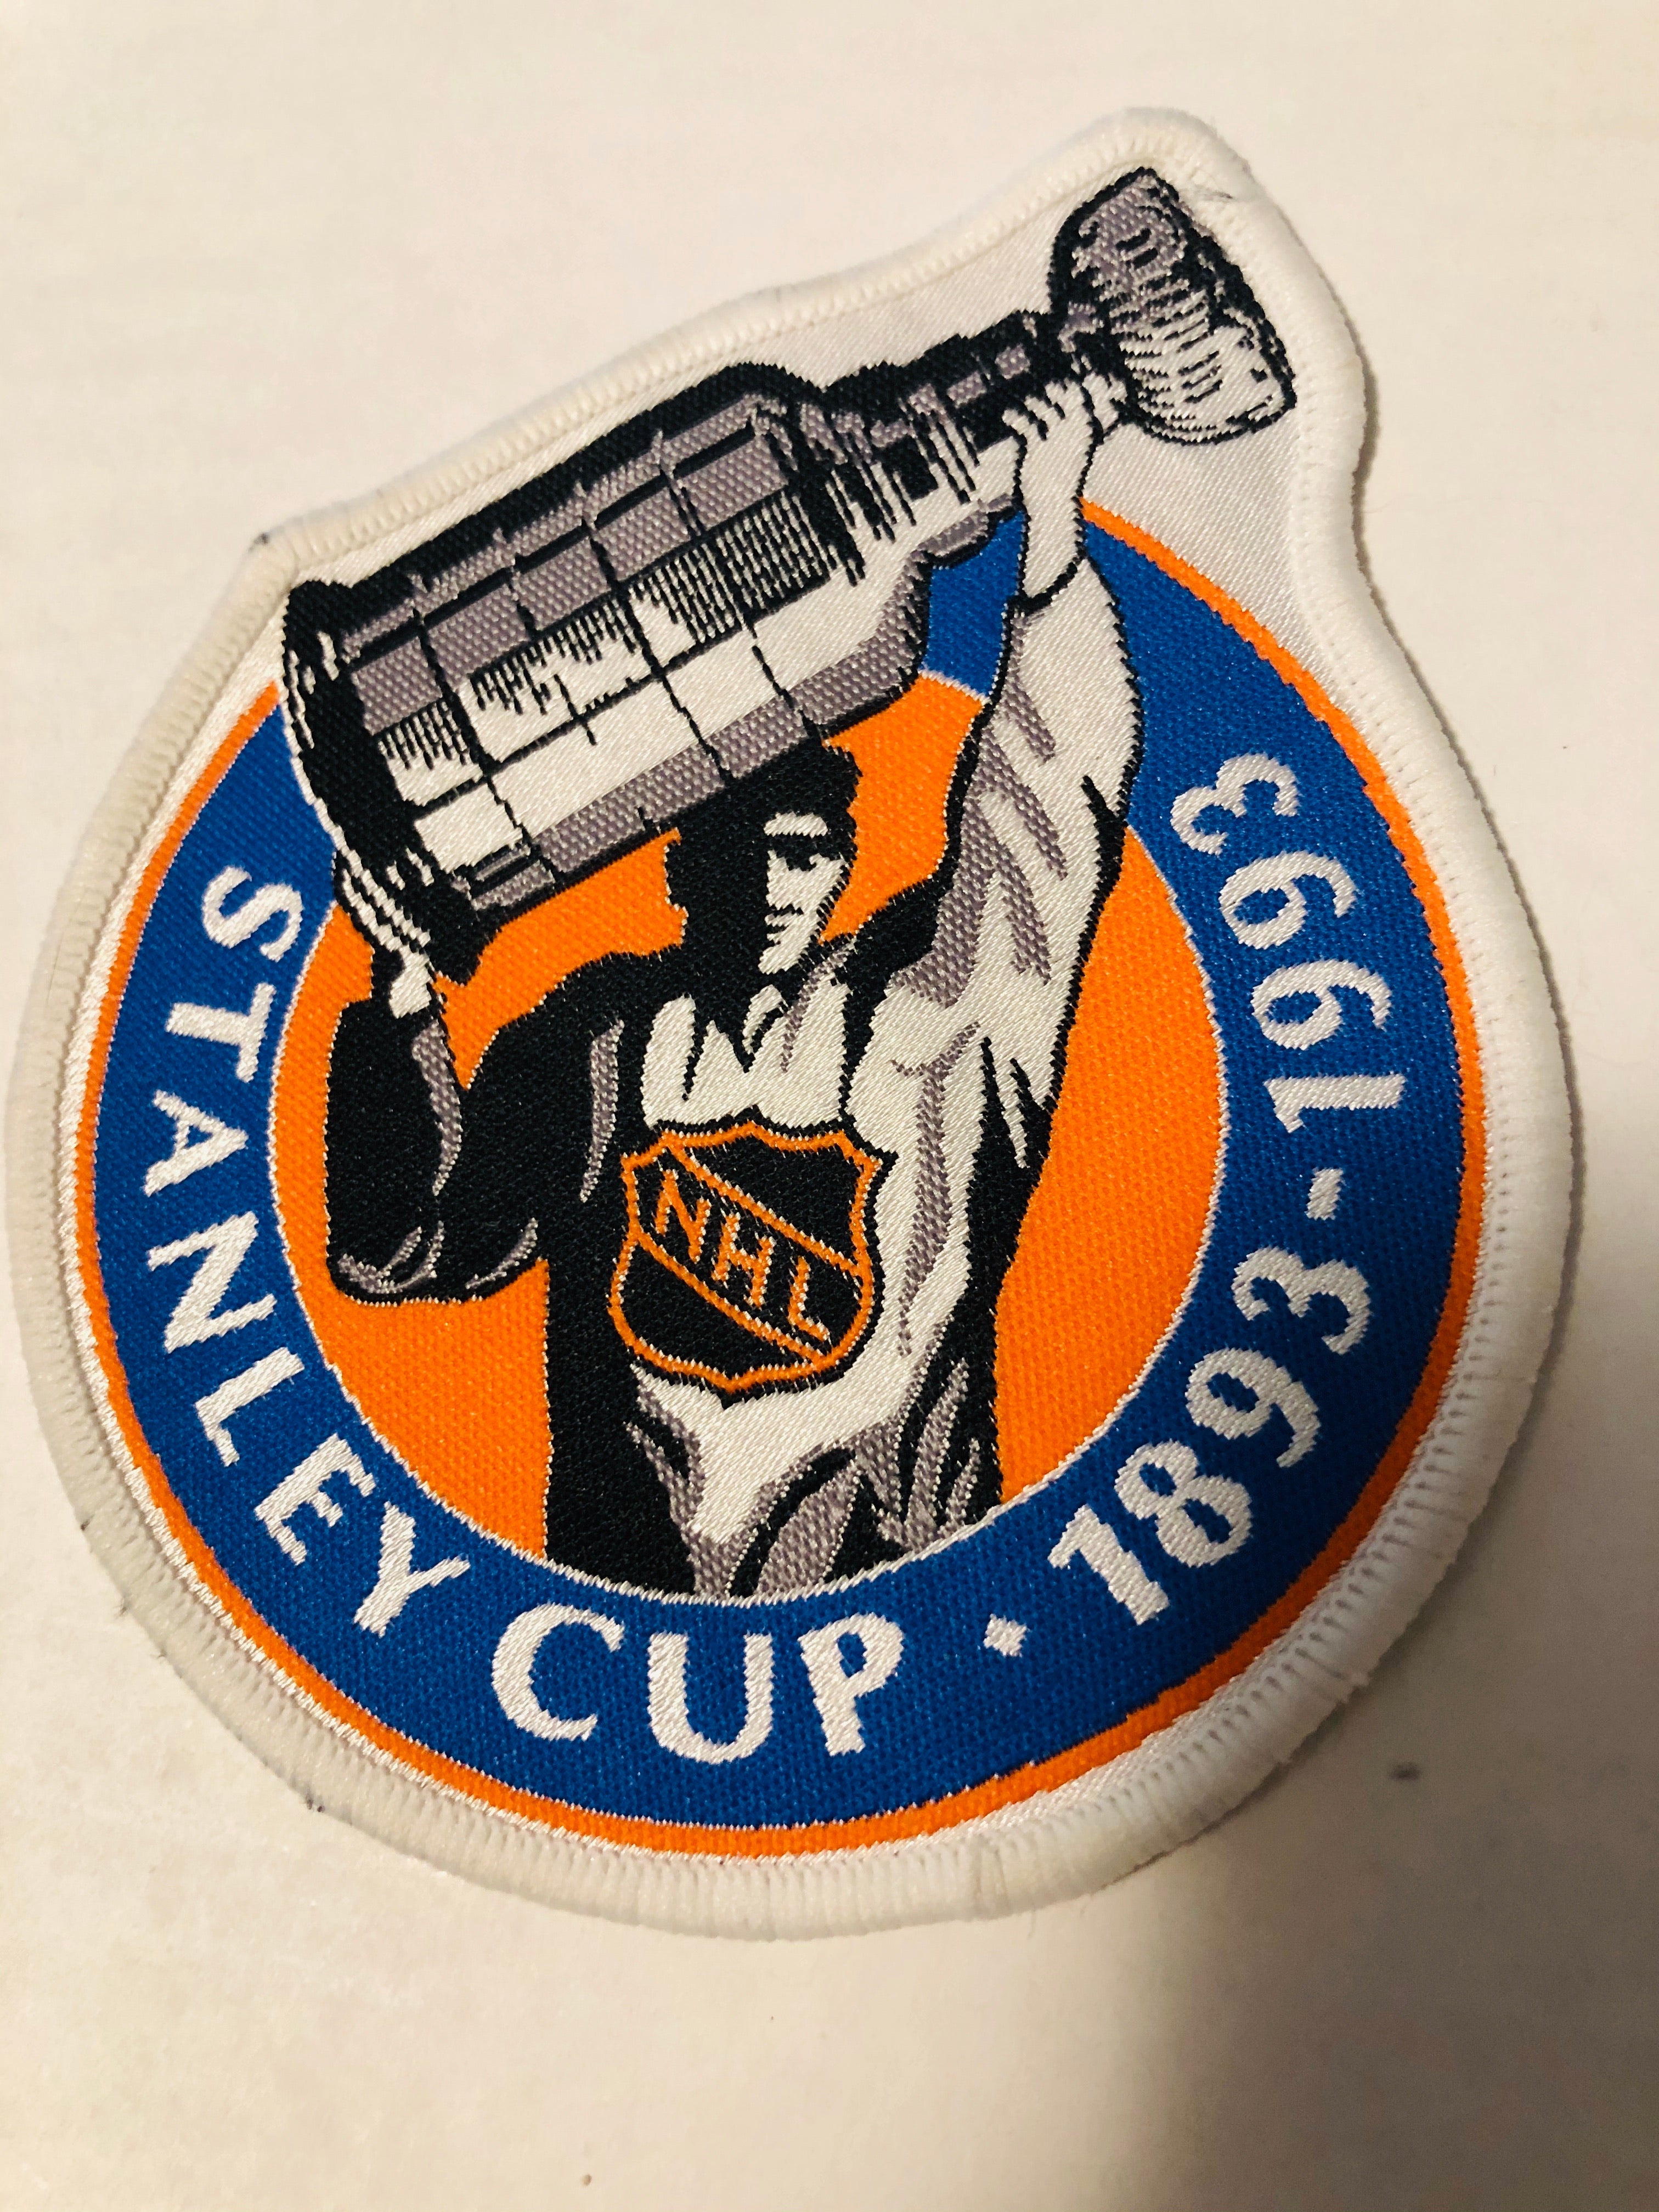 NHL Stanley Cup hockey patch 1993